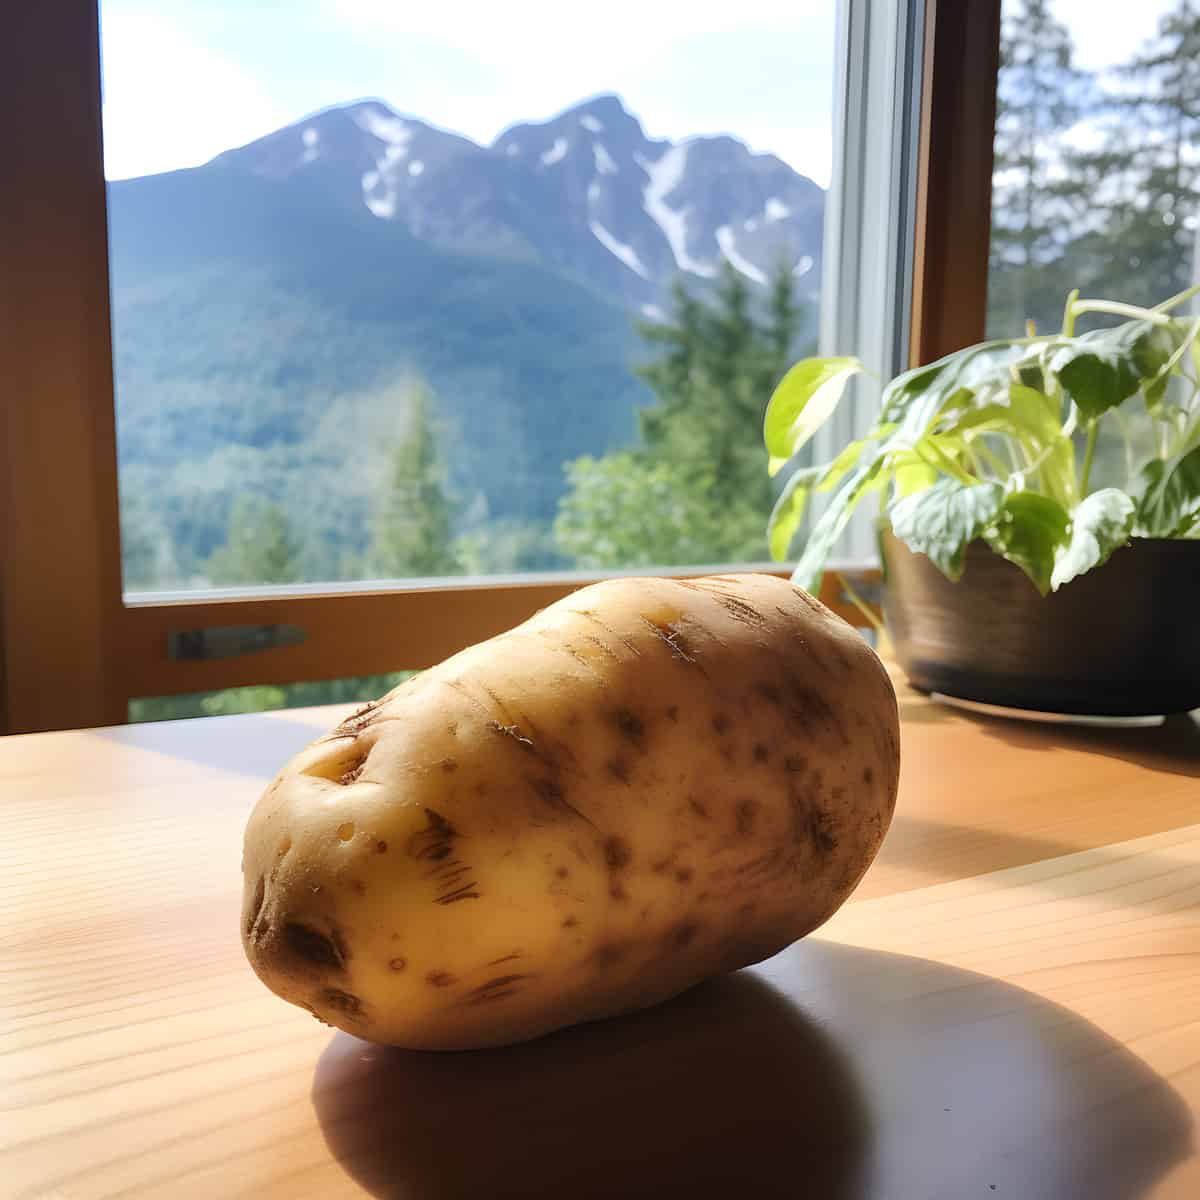 Alpine Russet Potatoes on a kitchen counter